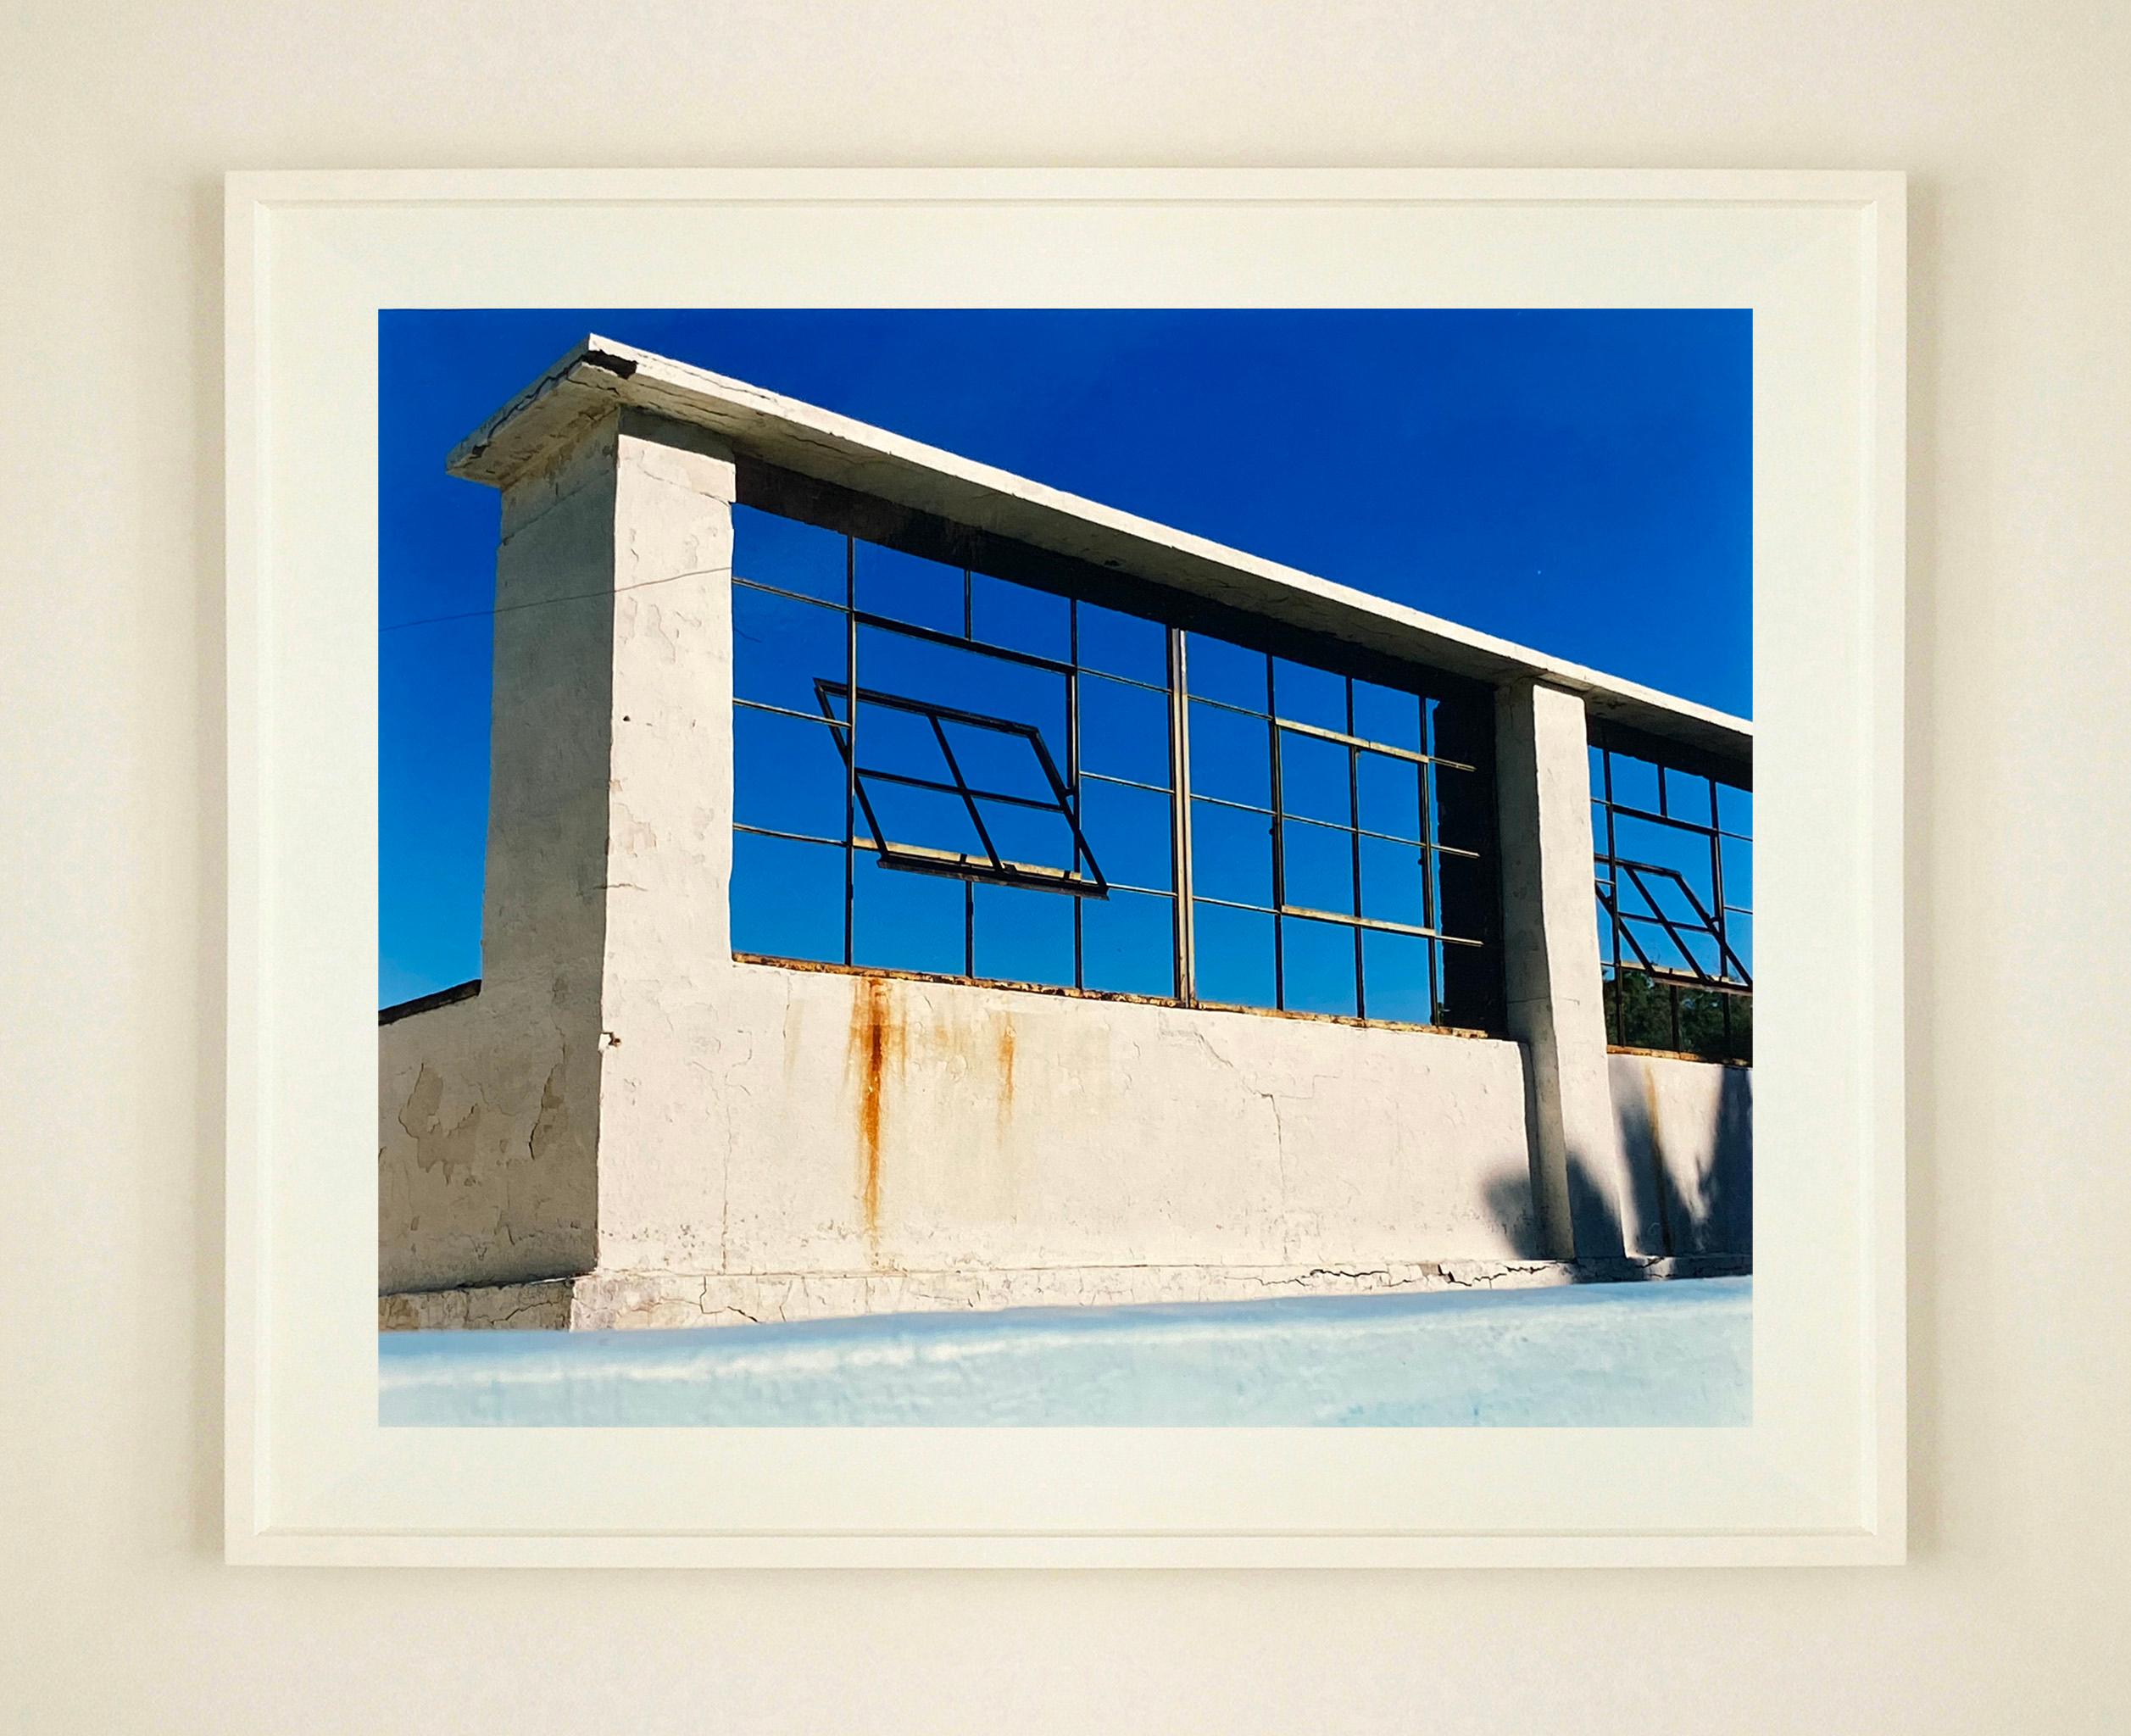 Zzyzx Resort Pool, Soda Dry Lake, California. Photograph from Richard Heeps 'Dream in Color' Series, from a California road trip, this abandoned structure against the blue sky makes a striking composition.

This artwork is a limited edition of 25,